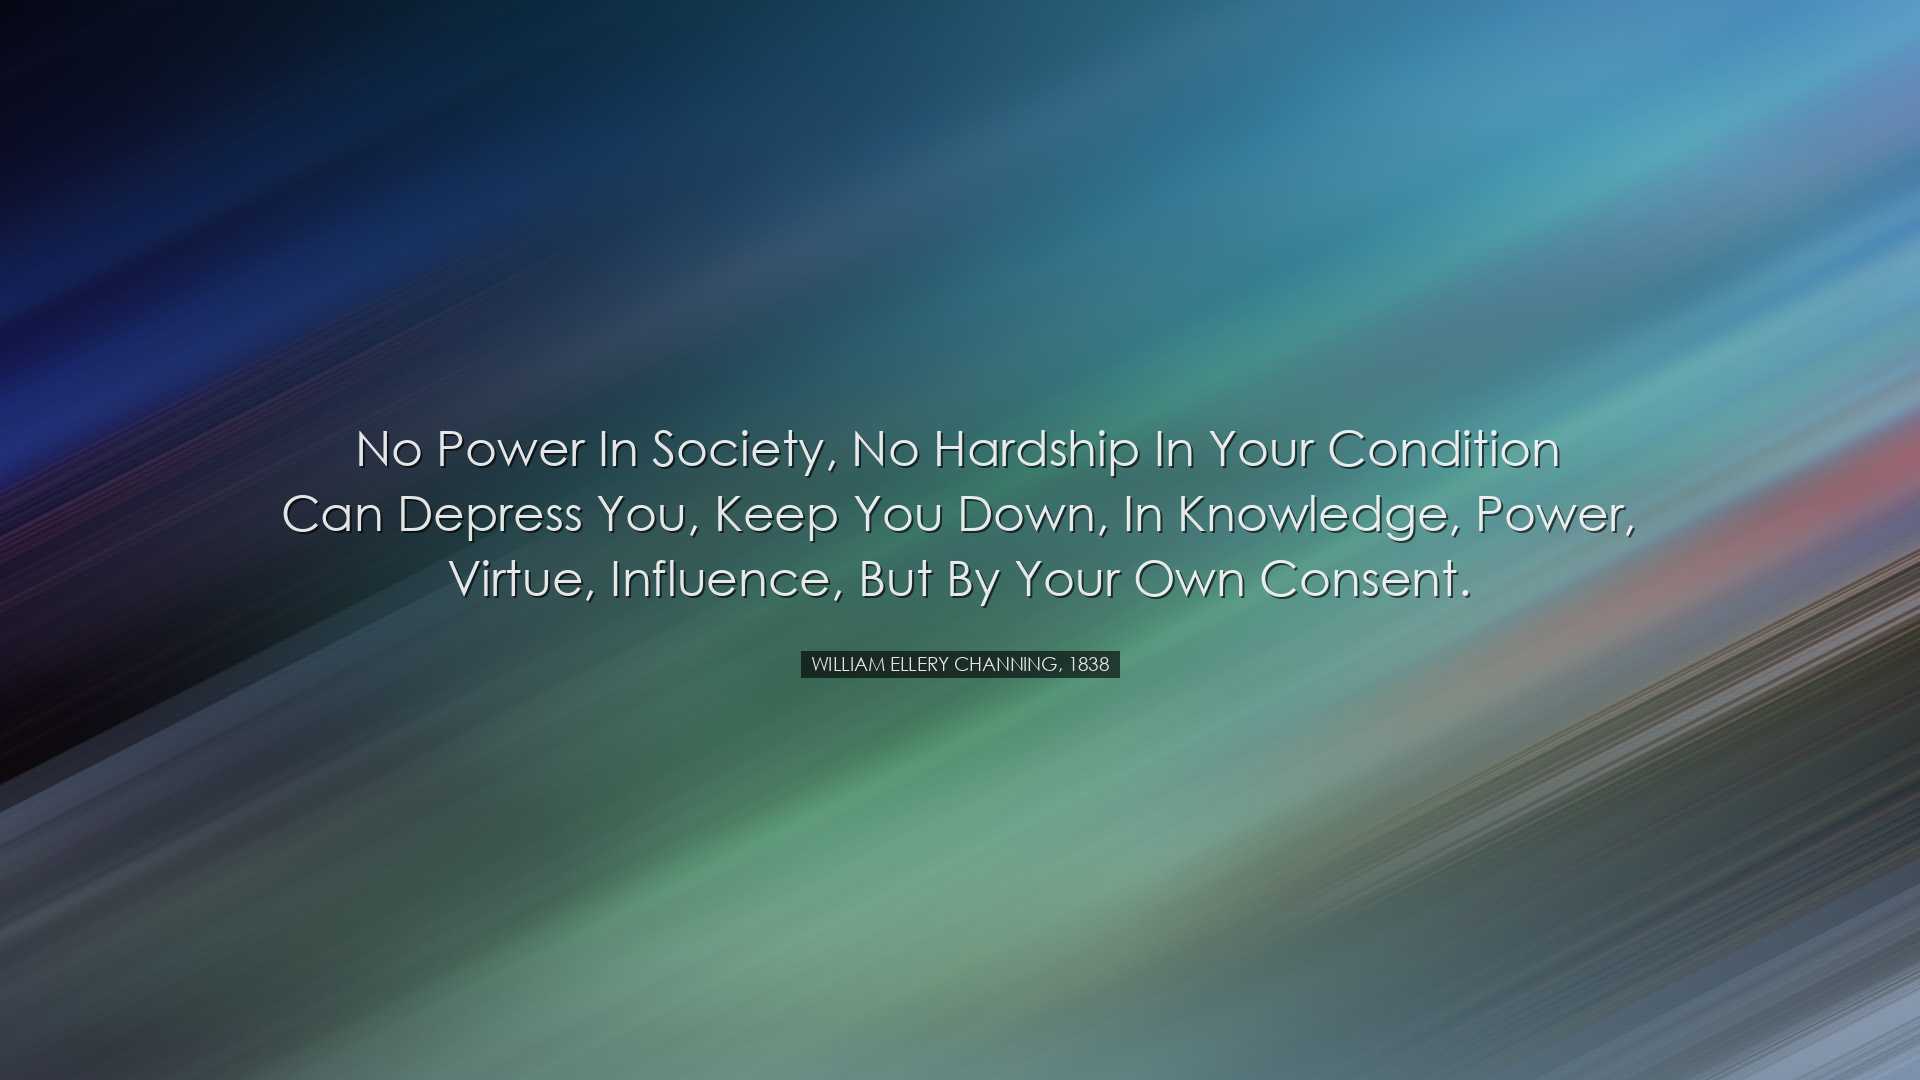 No power in society, no hardship in your condition can depress you